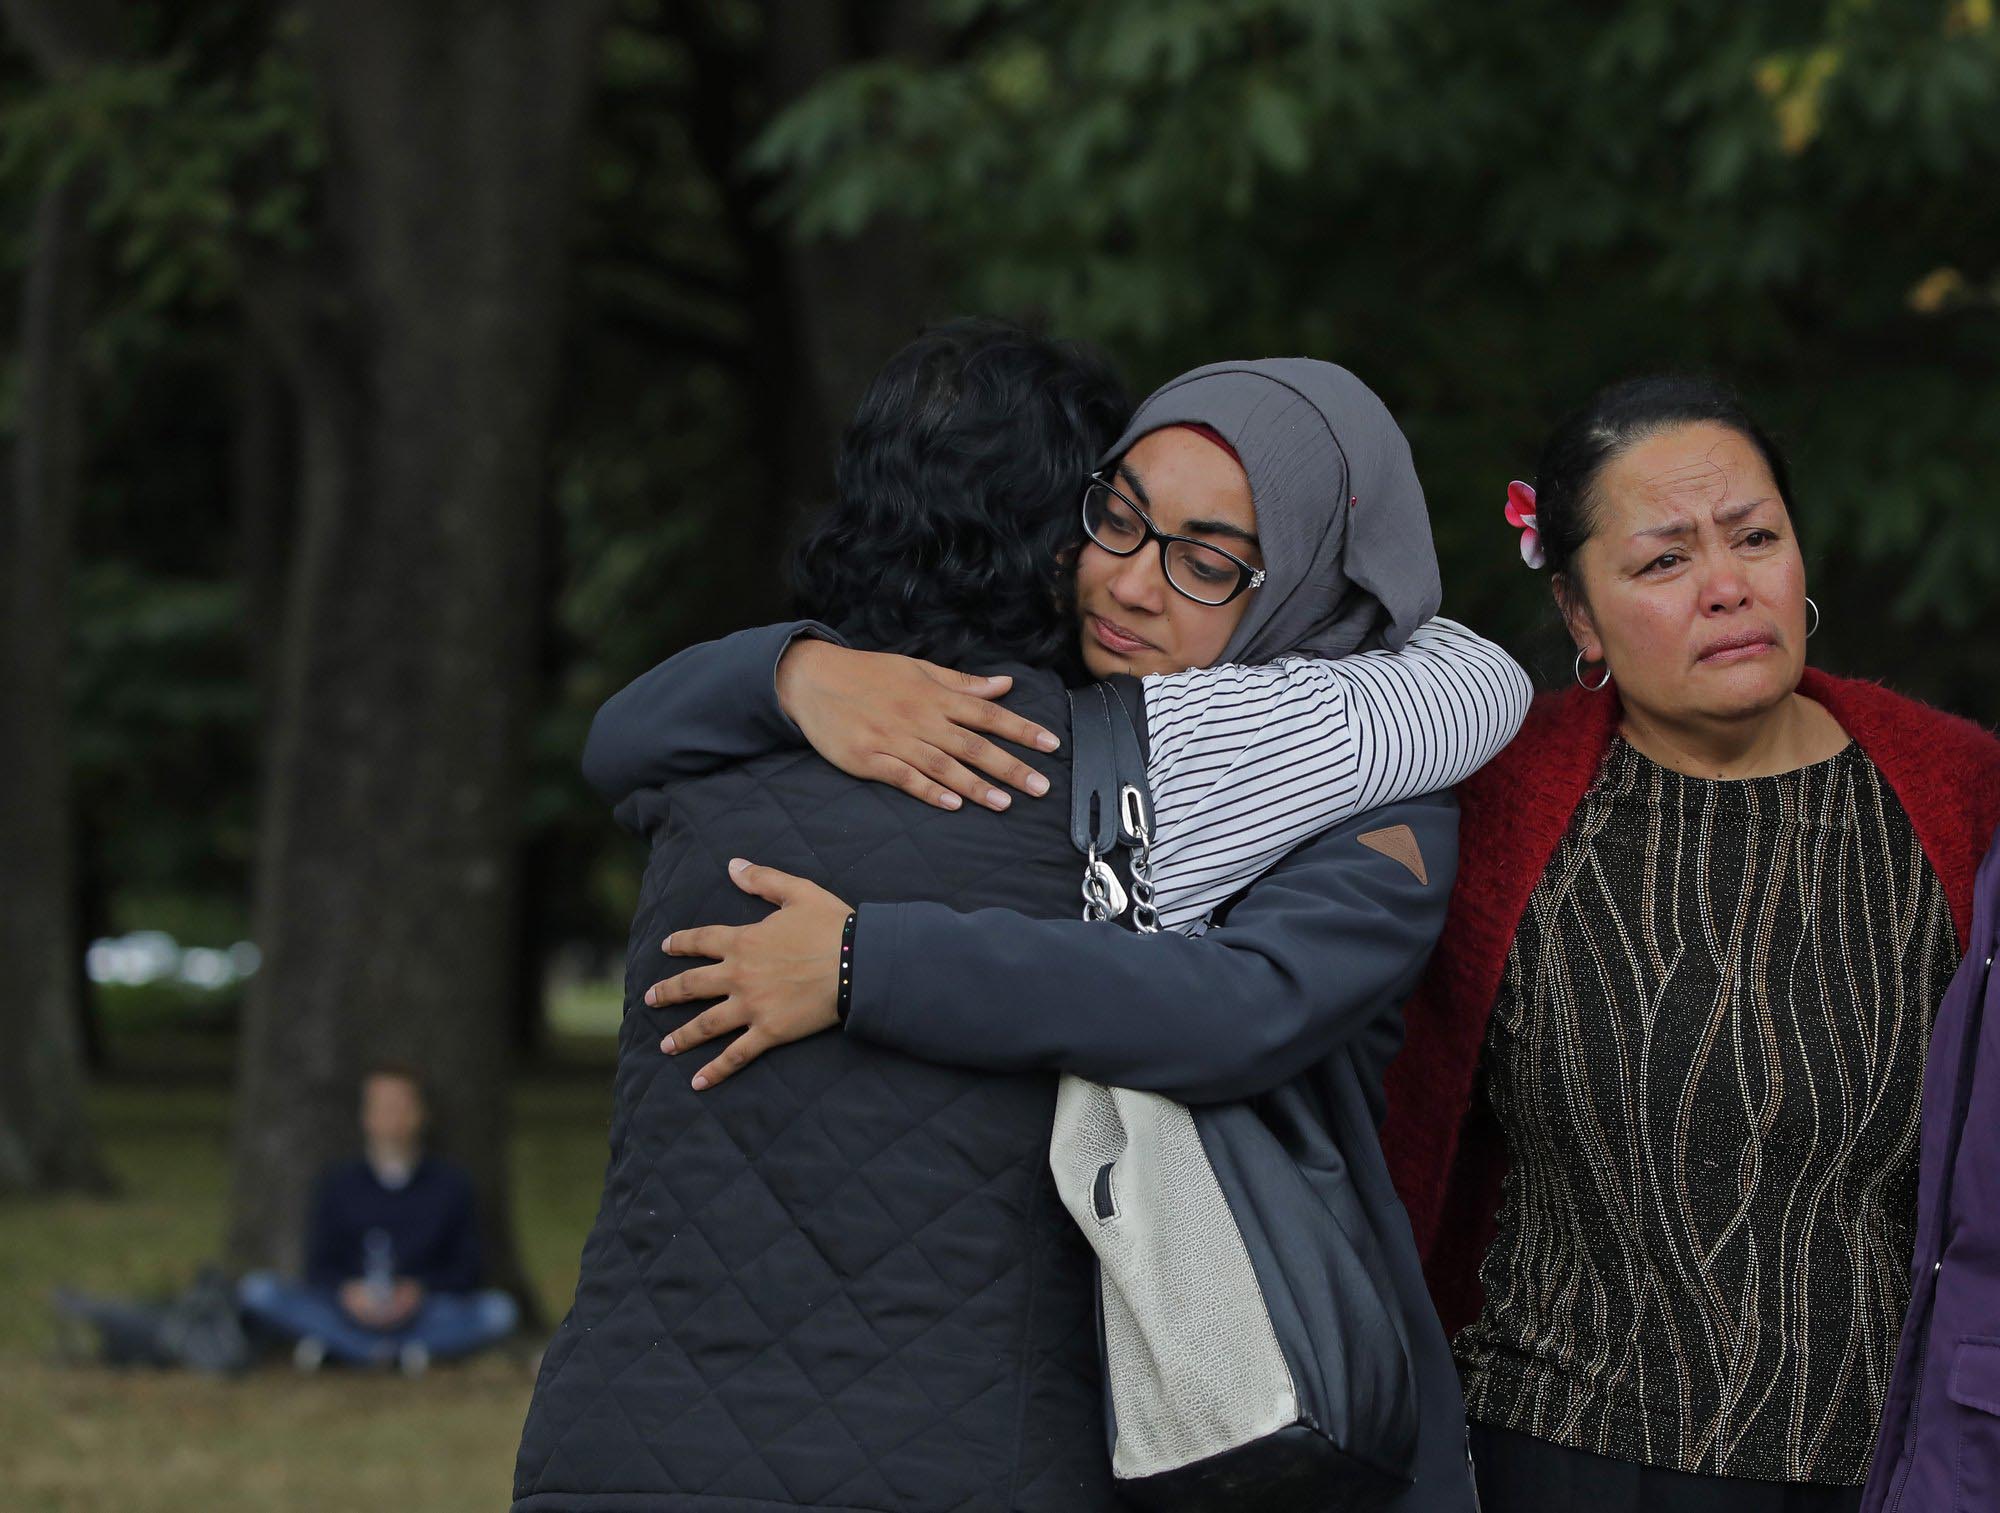 Mourners hug after paying their respects to the victims near the Masjid Al Noor mosque in Christchurch, New Zealand, Monday, March 18, 2019. Photo: AP